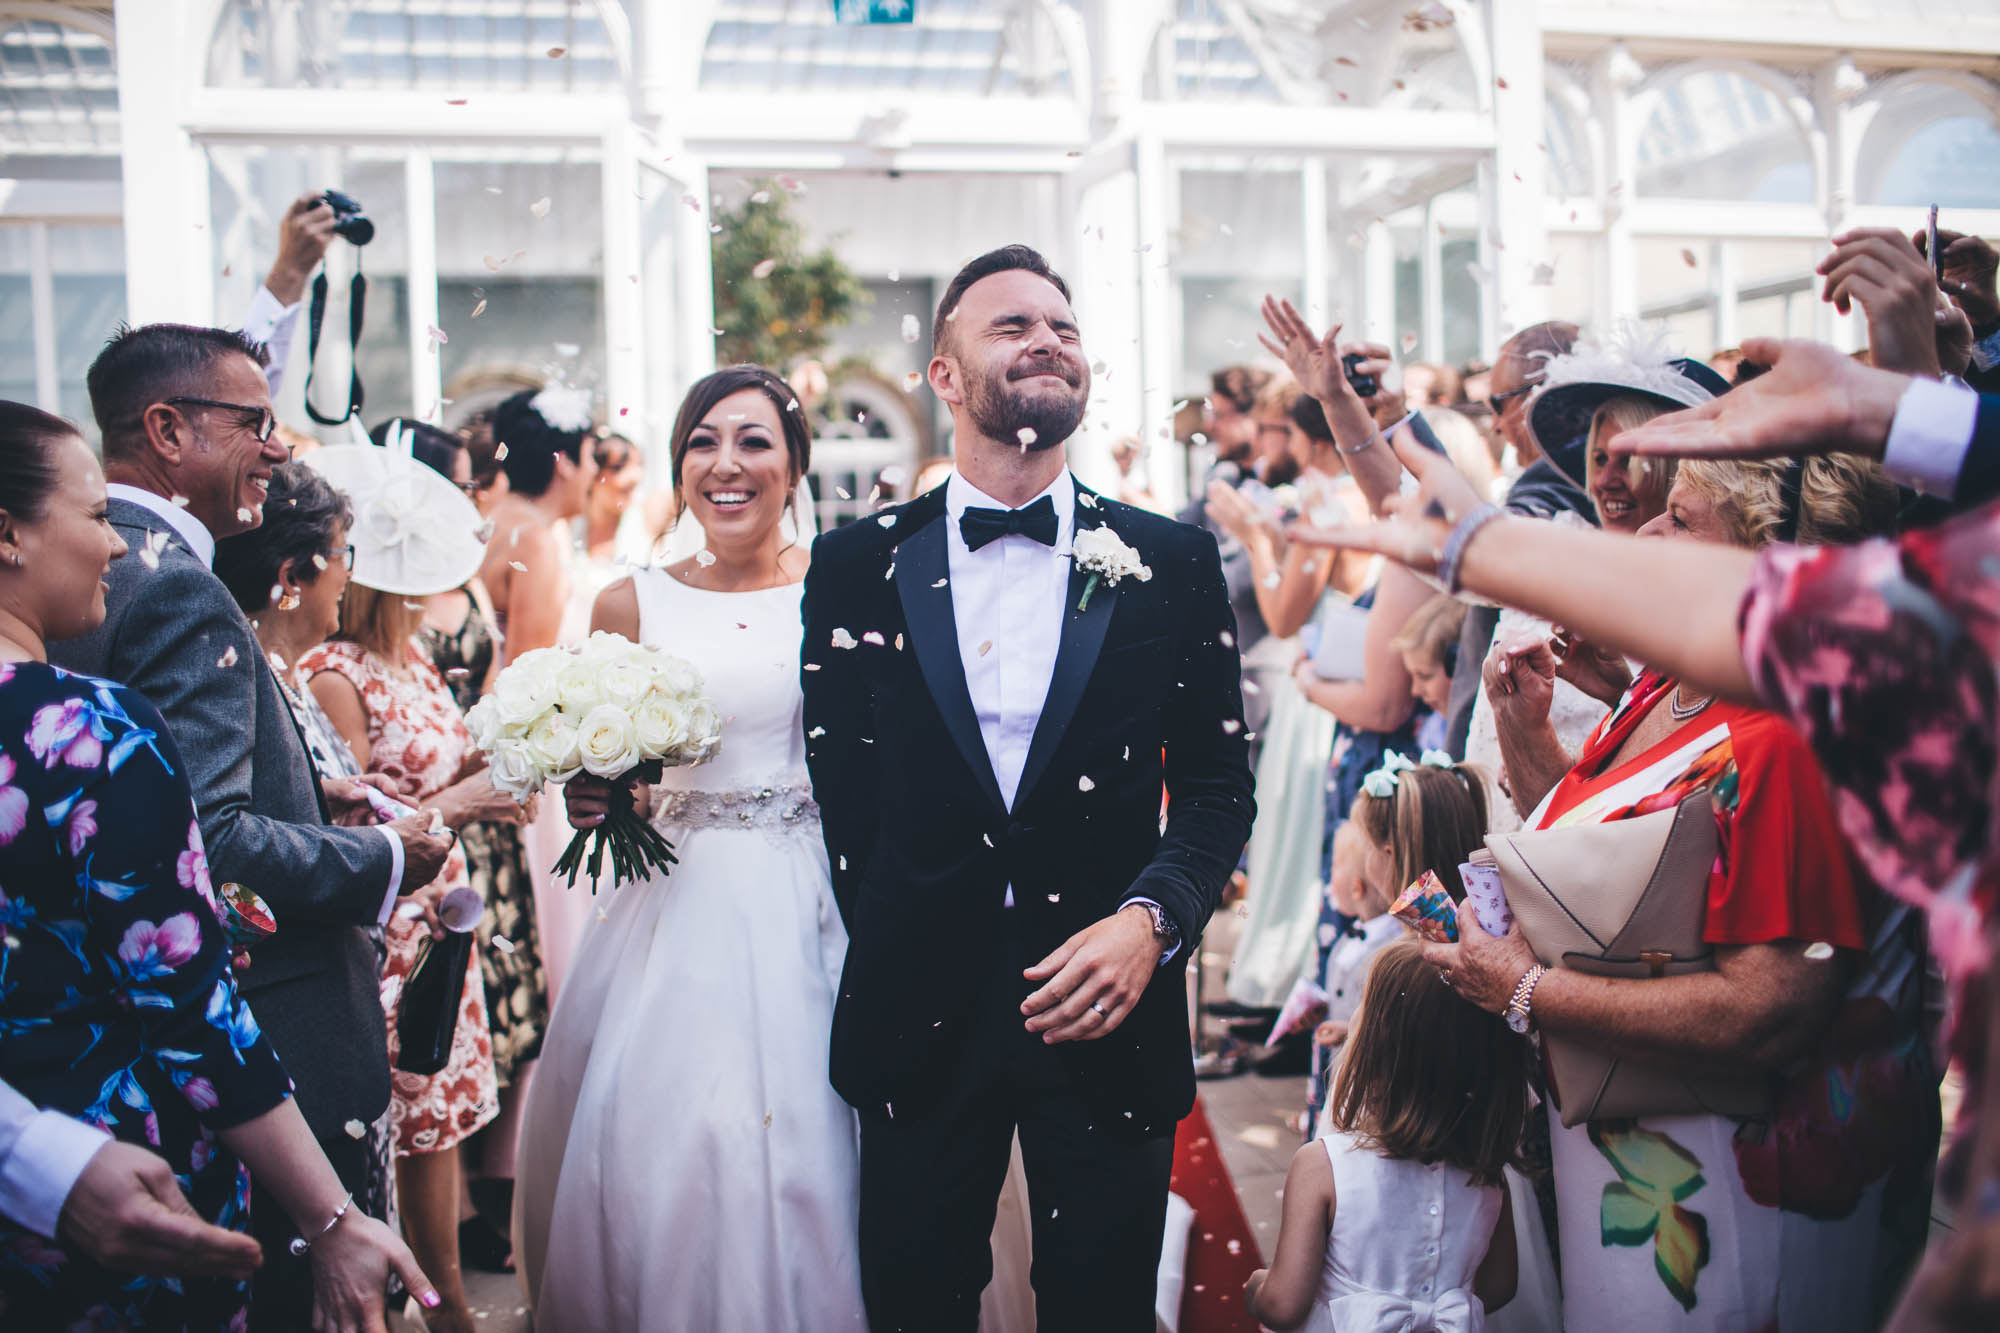 Guests throw confetti at newlyweds as they leave the wedding ceremony